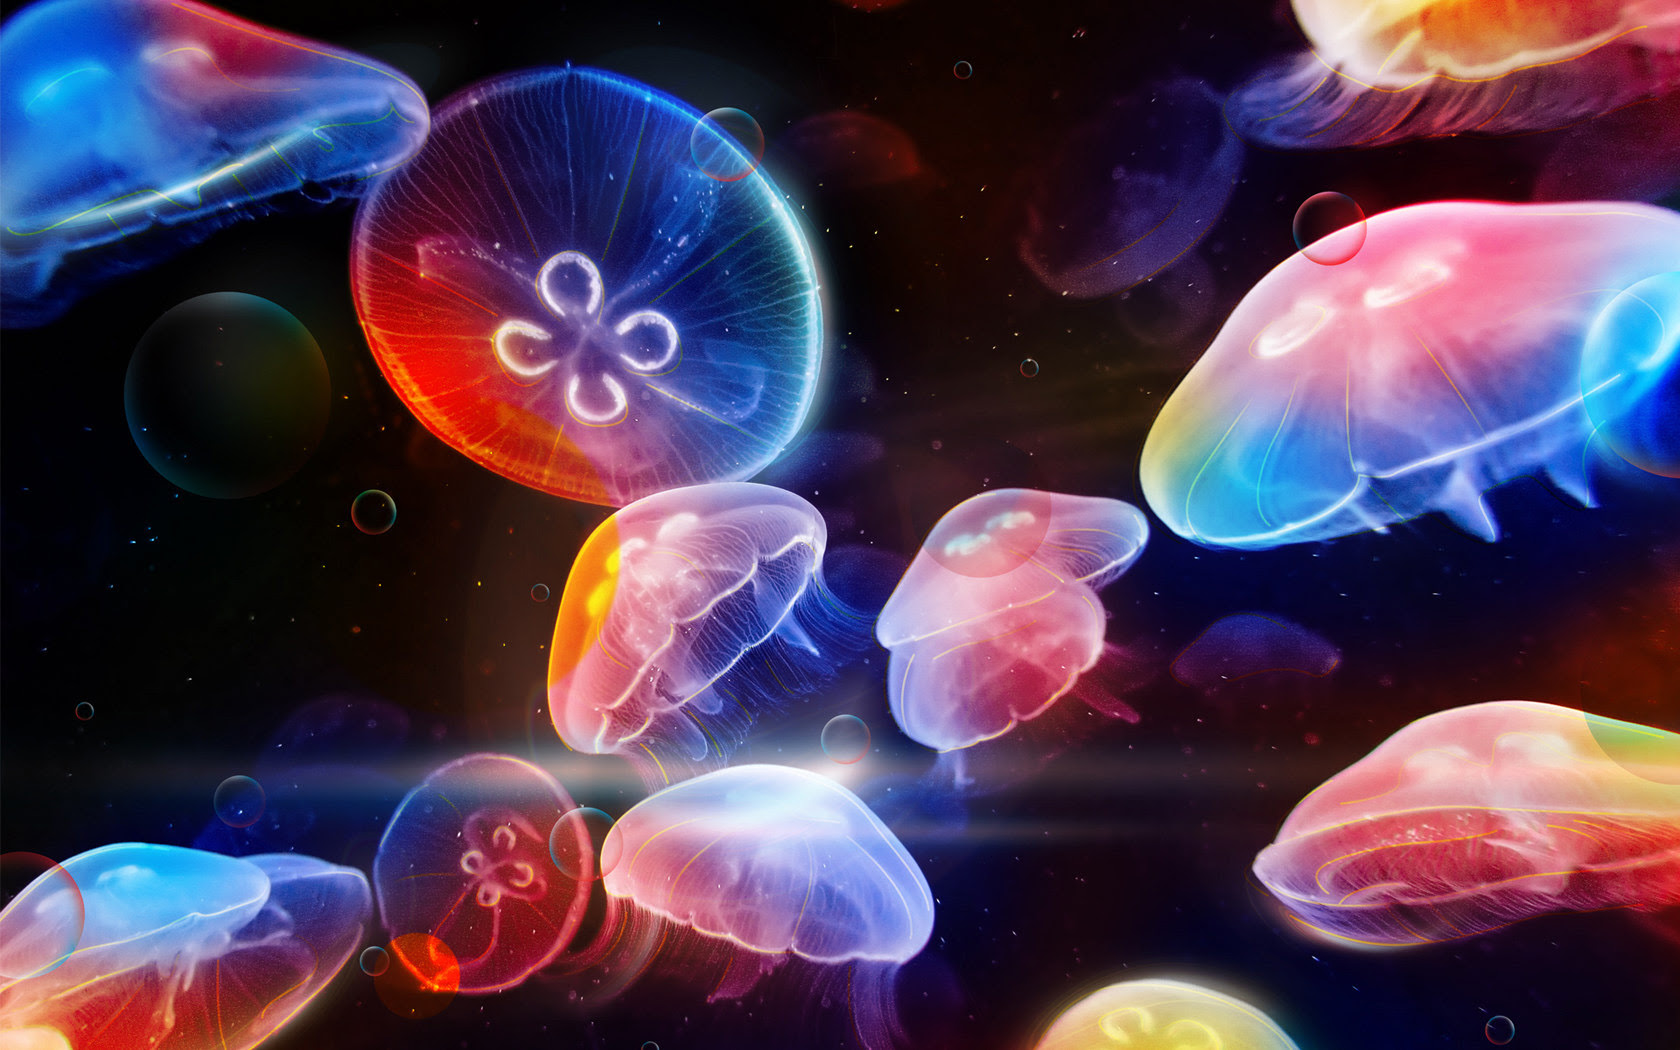 Jellyfish wallpapers and images - wallpapers, pictures, photos